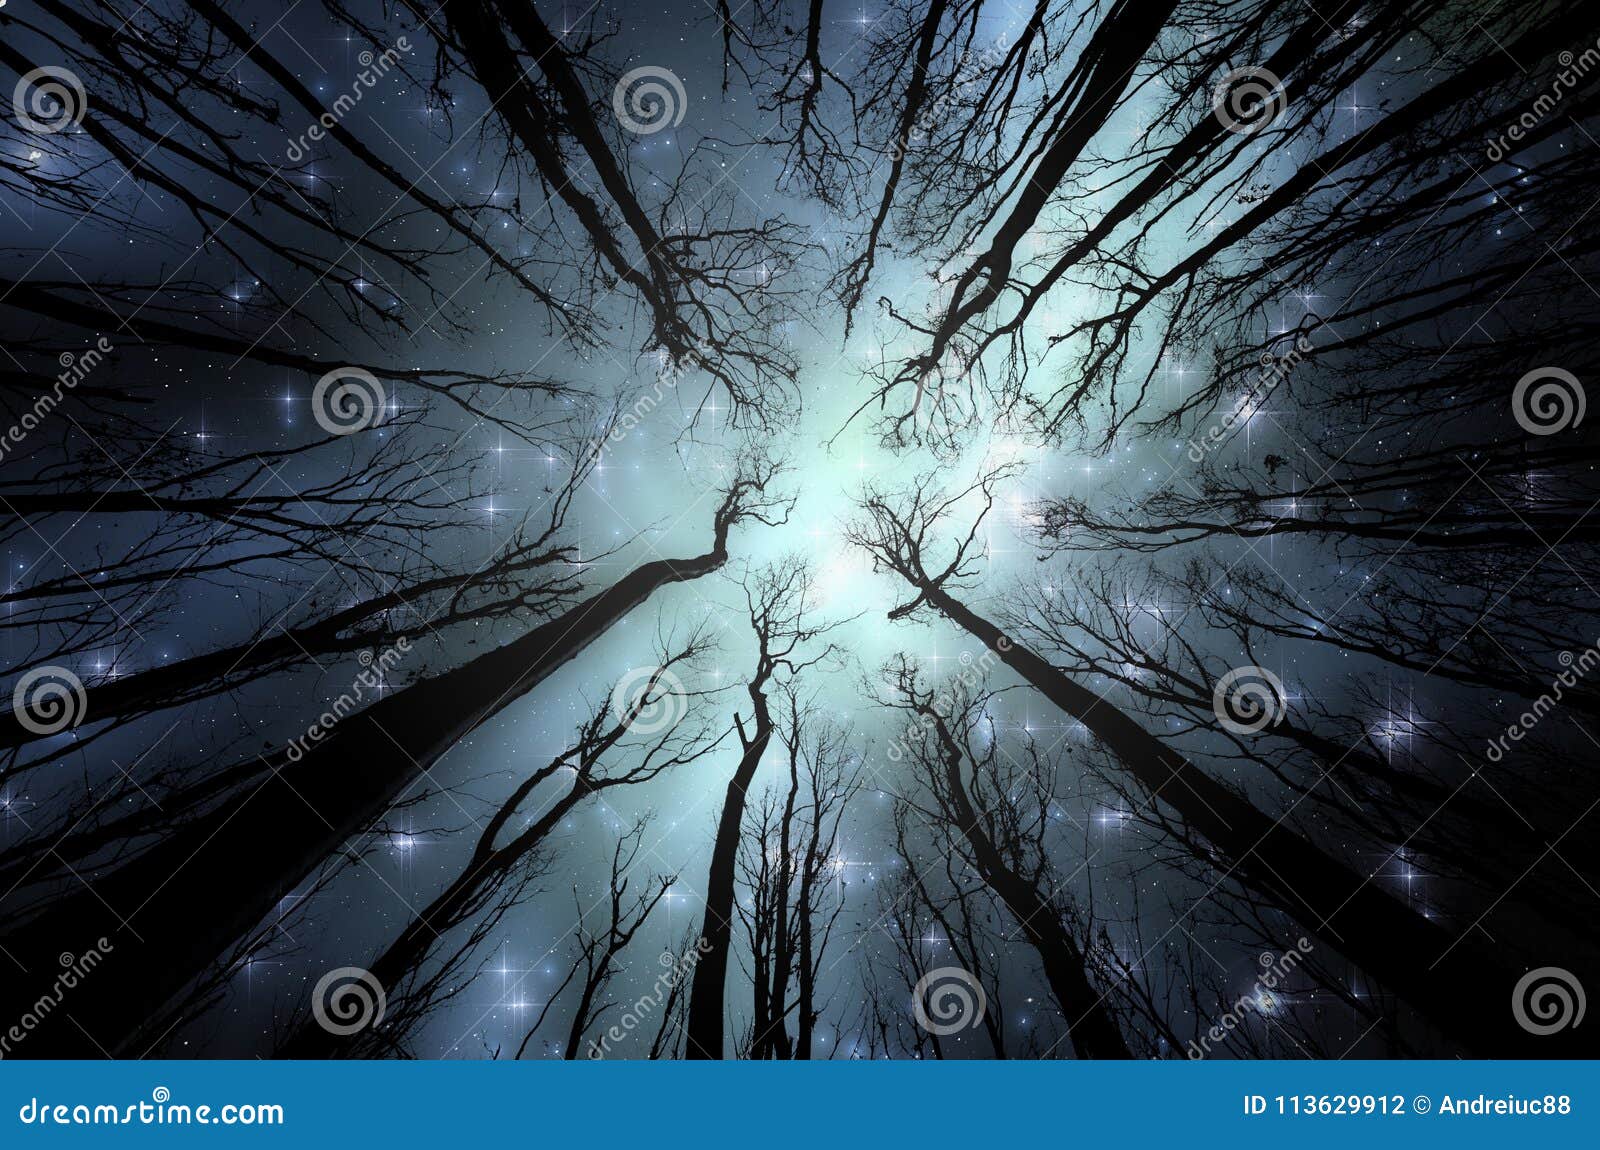 magical forest with stars on the sky